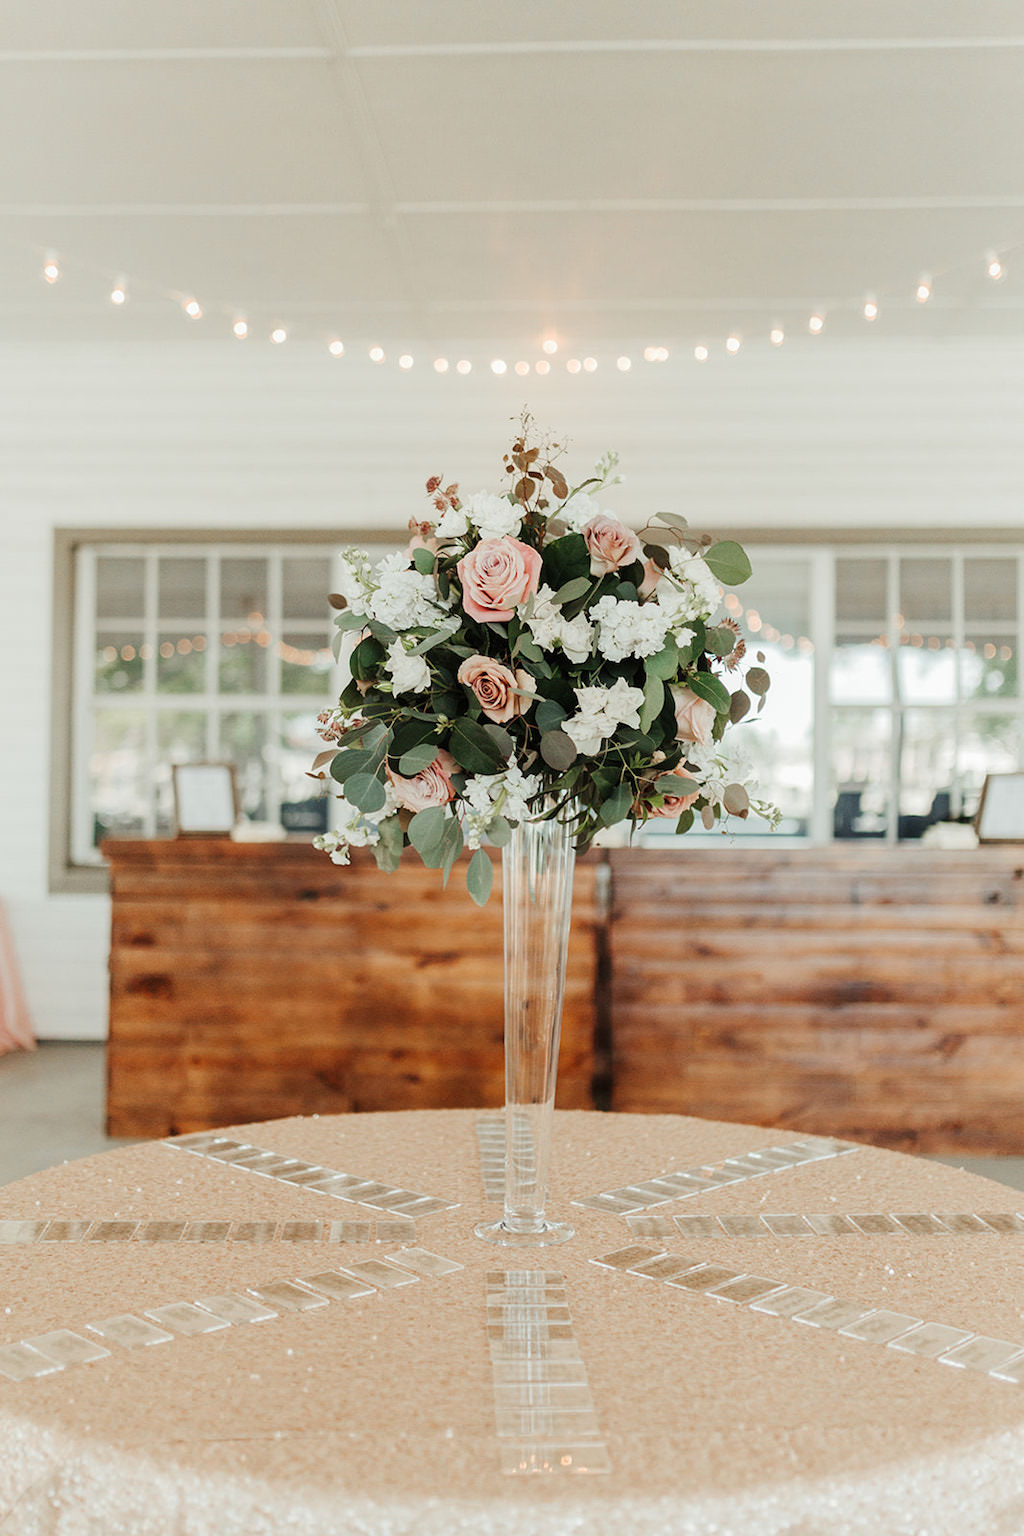 Garden Chic Inspired Wedding Reception Decor, Tall Glass Vase with Mauve, White Florals and Greenery Arrangement on Round Table with Gold Glitter Sparkle Linen